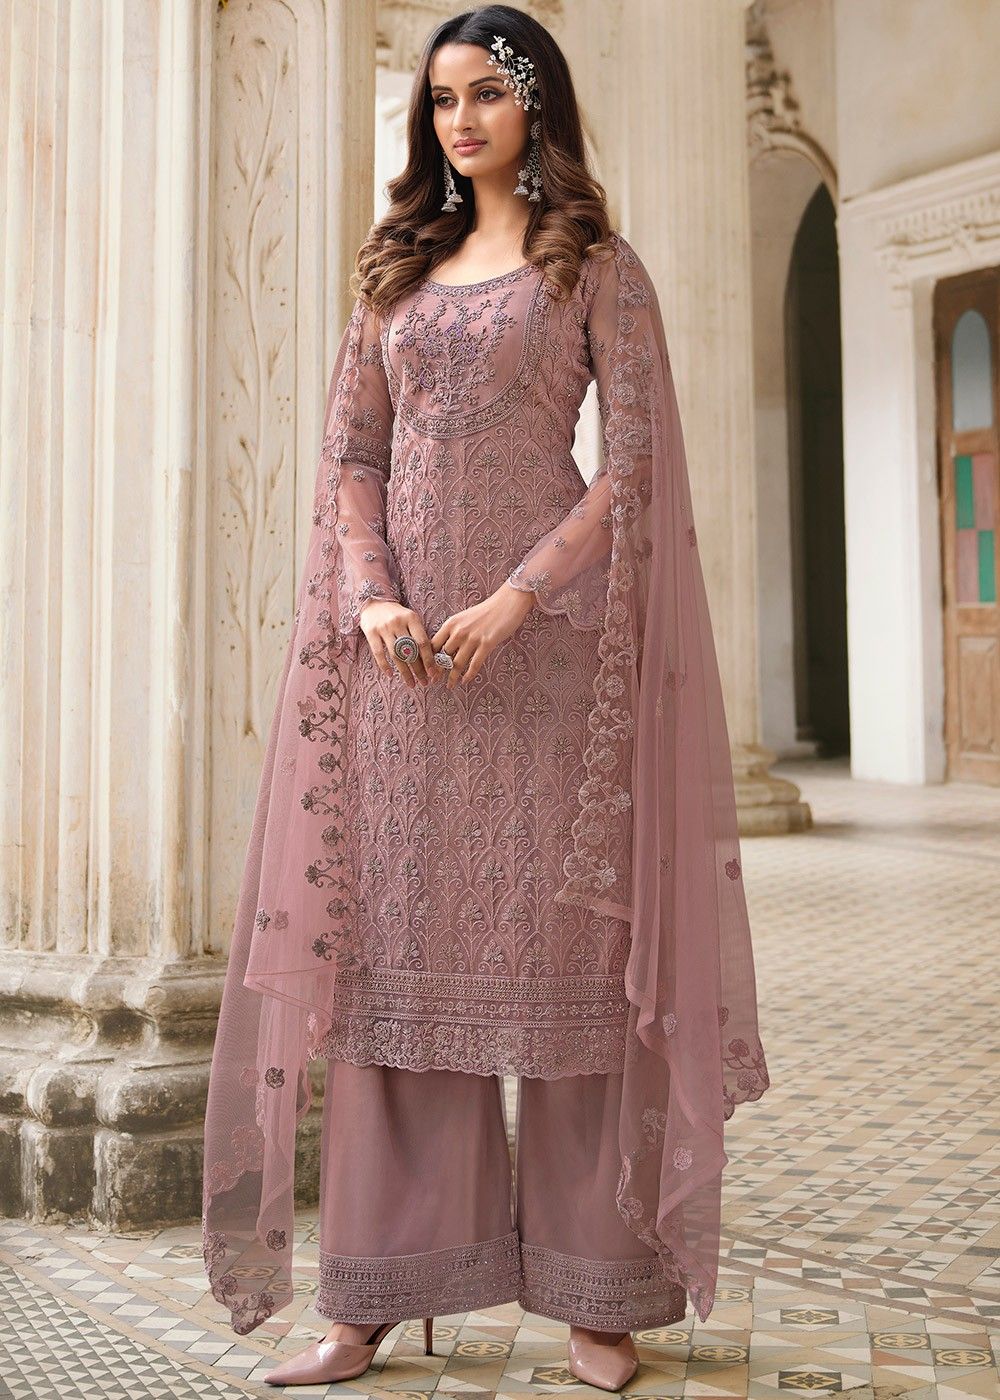 Linen Suit Embroidered stitched  salwar kameez hand stone work for EID  £25 